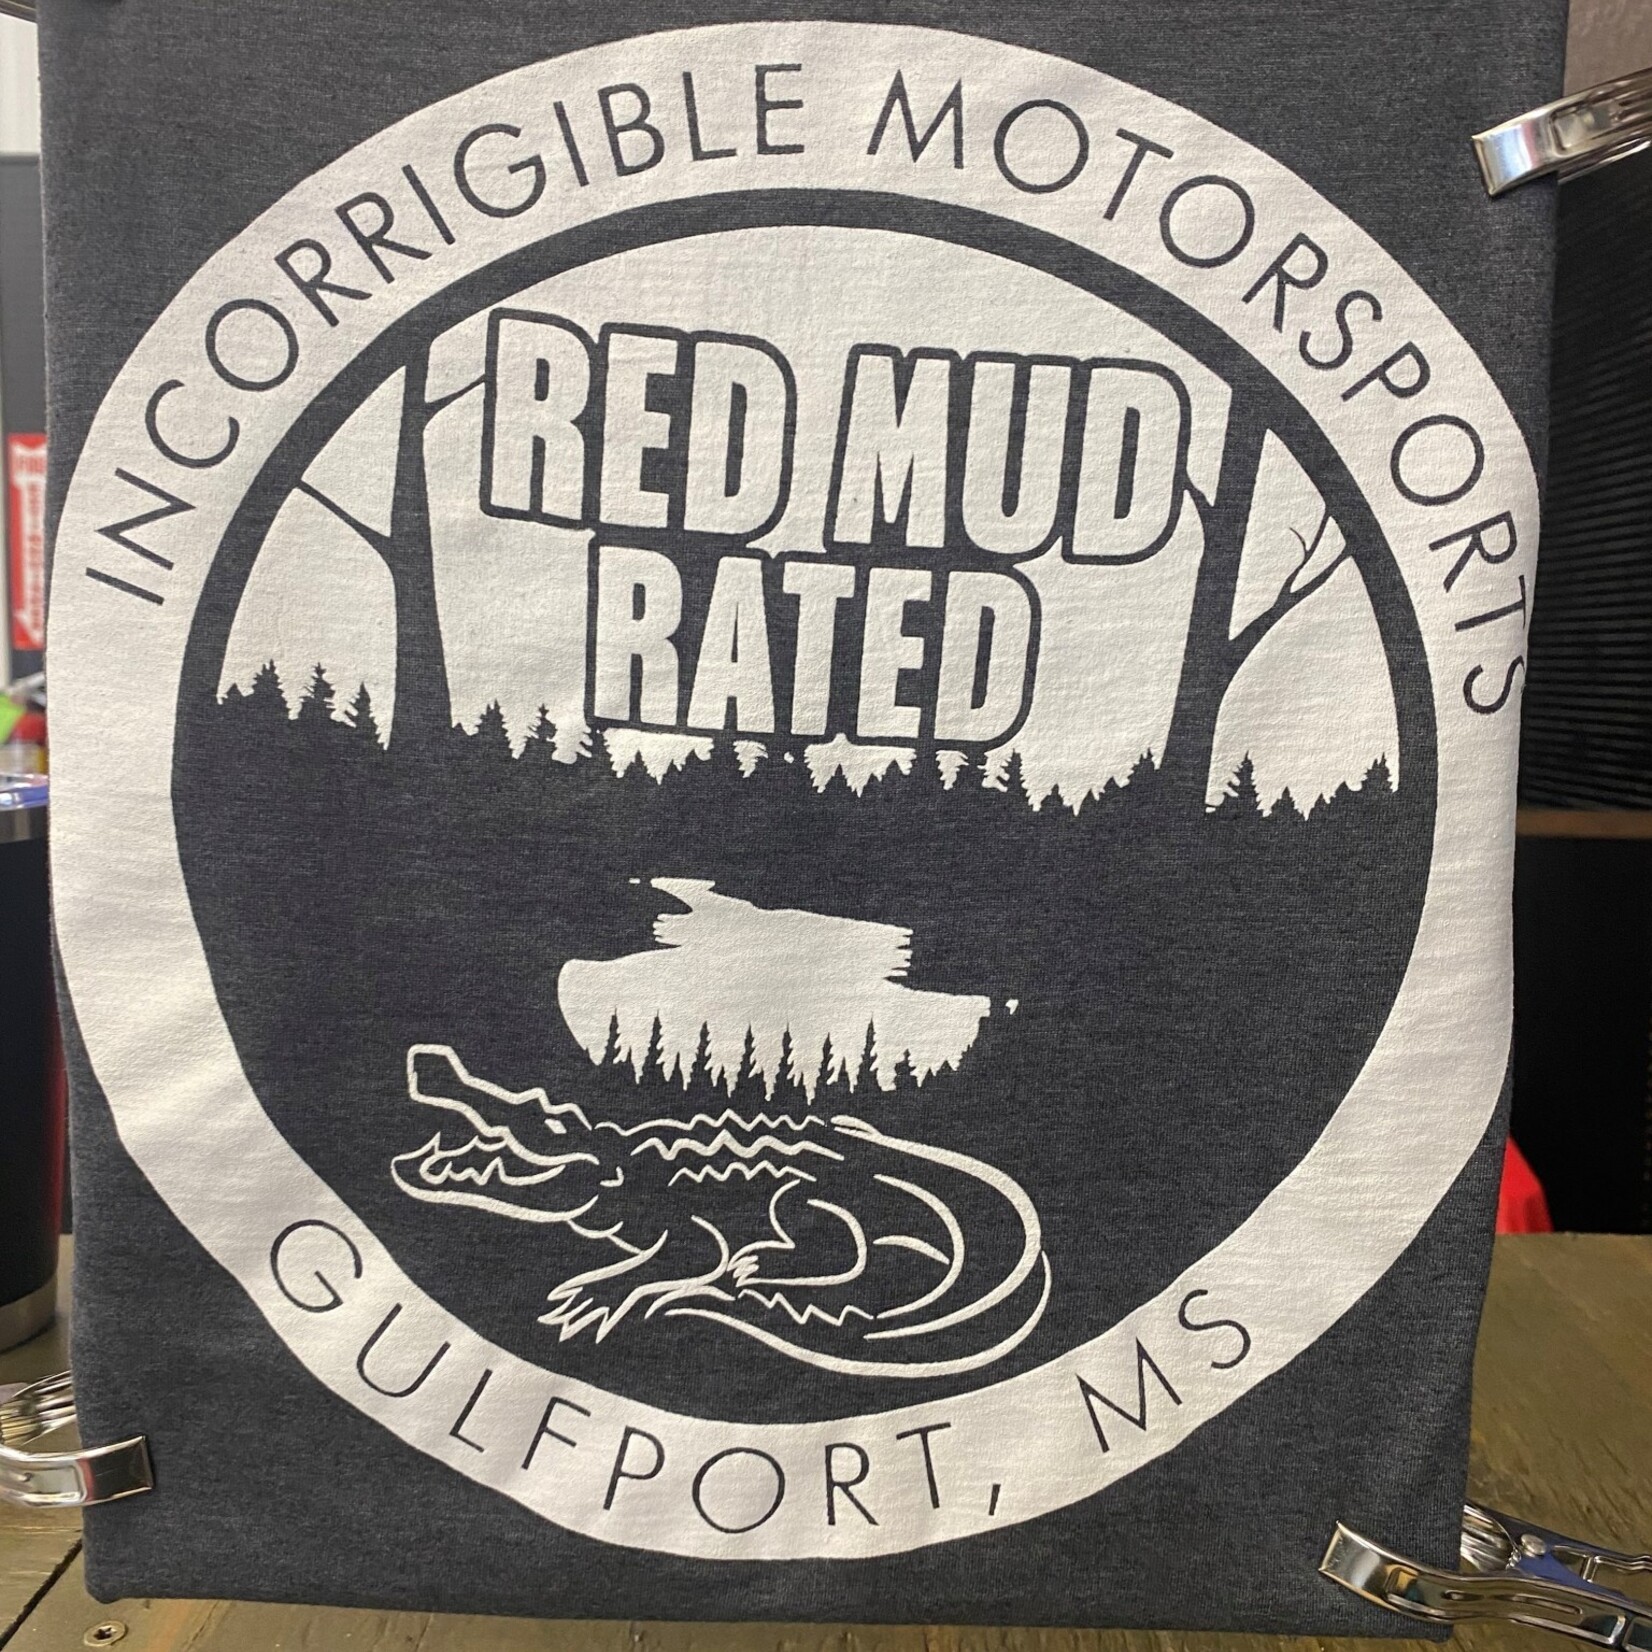 INCORRIGIBLE MOTORSPORTS INCORRIGIBLE MOTORSPORTS "RED MUD RATED" T-SHIRT